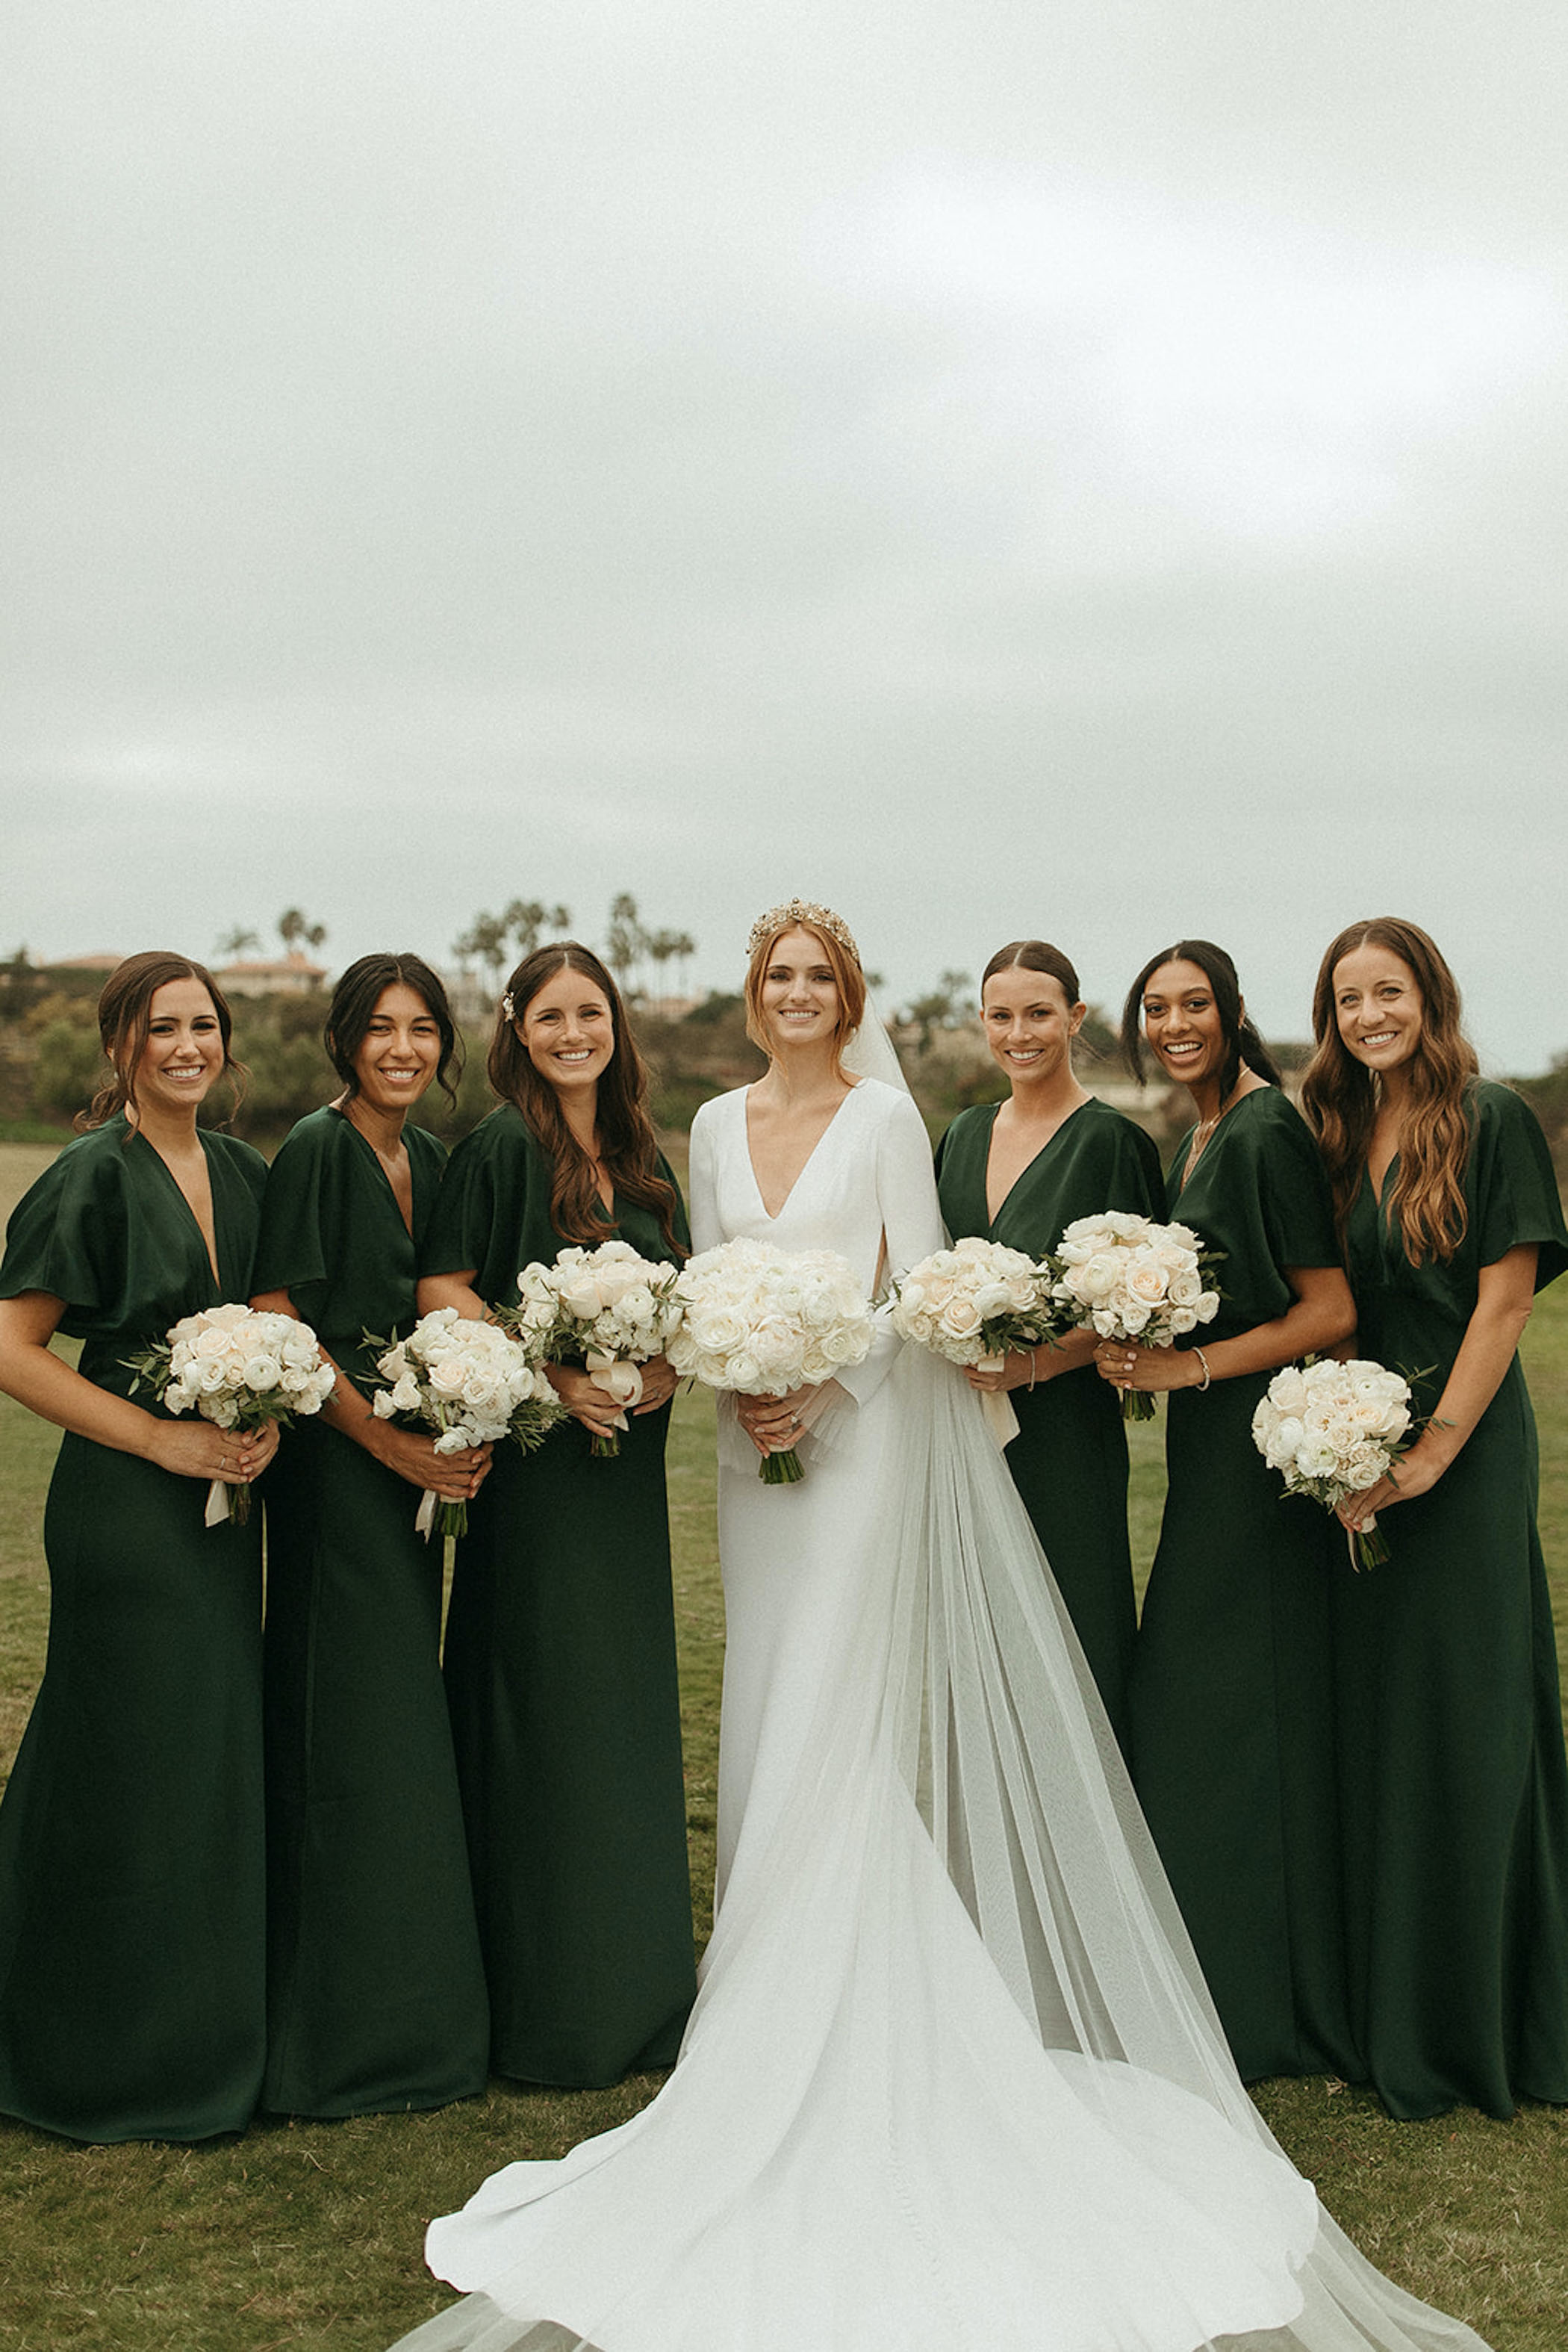 Modern Day Fairytale Wedding With Thousands of Sparkling Lights Green Bridesmaids Dresses